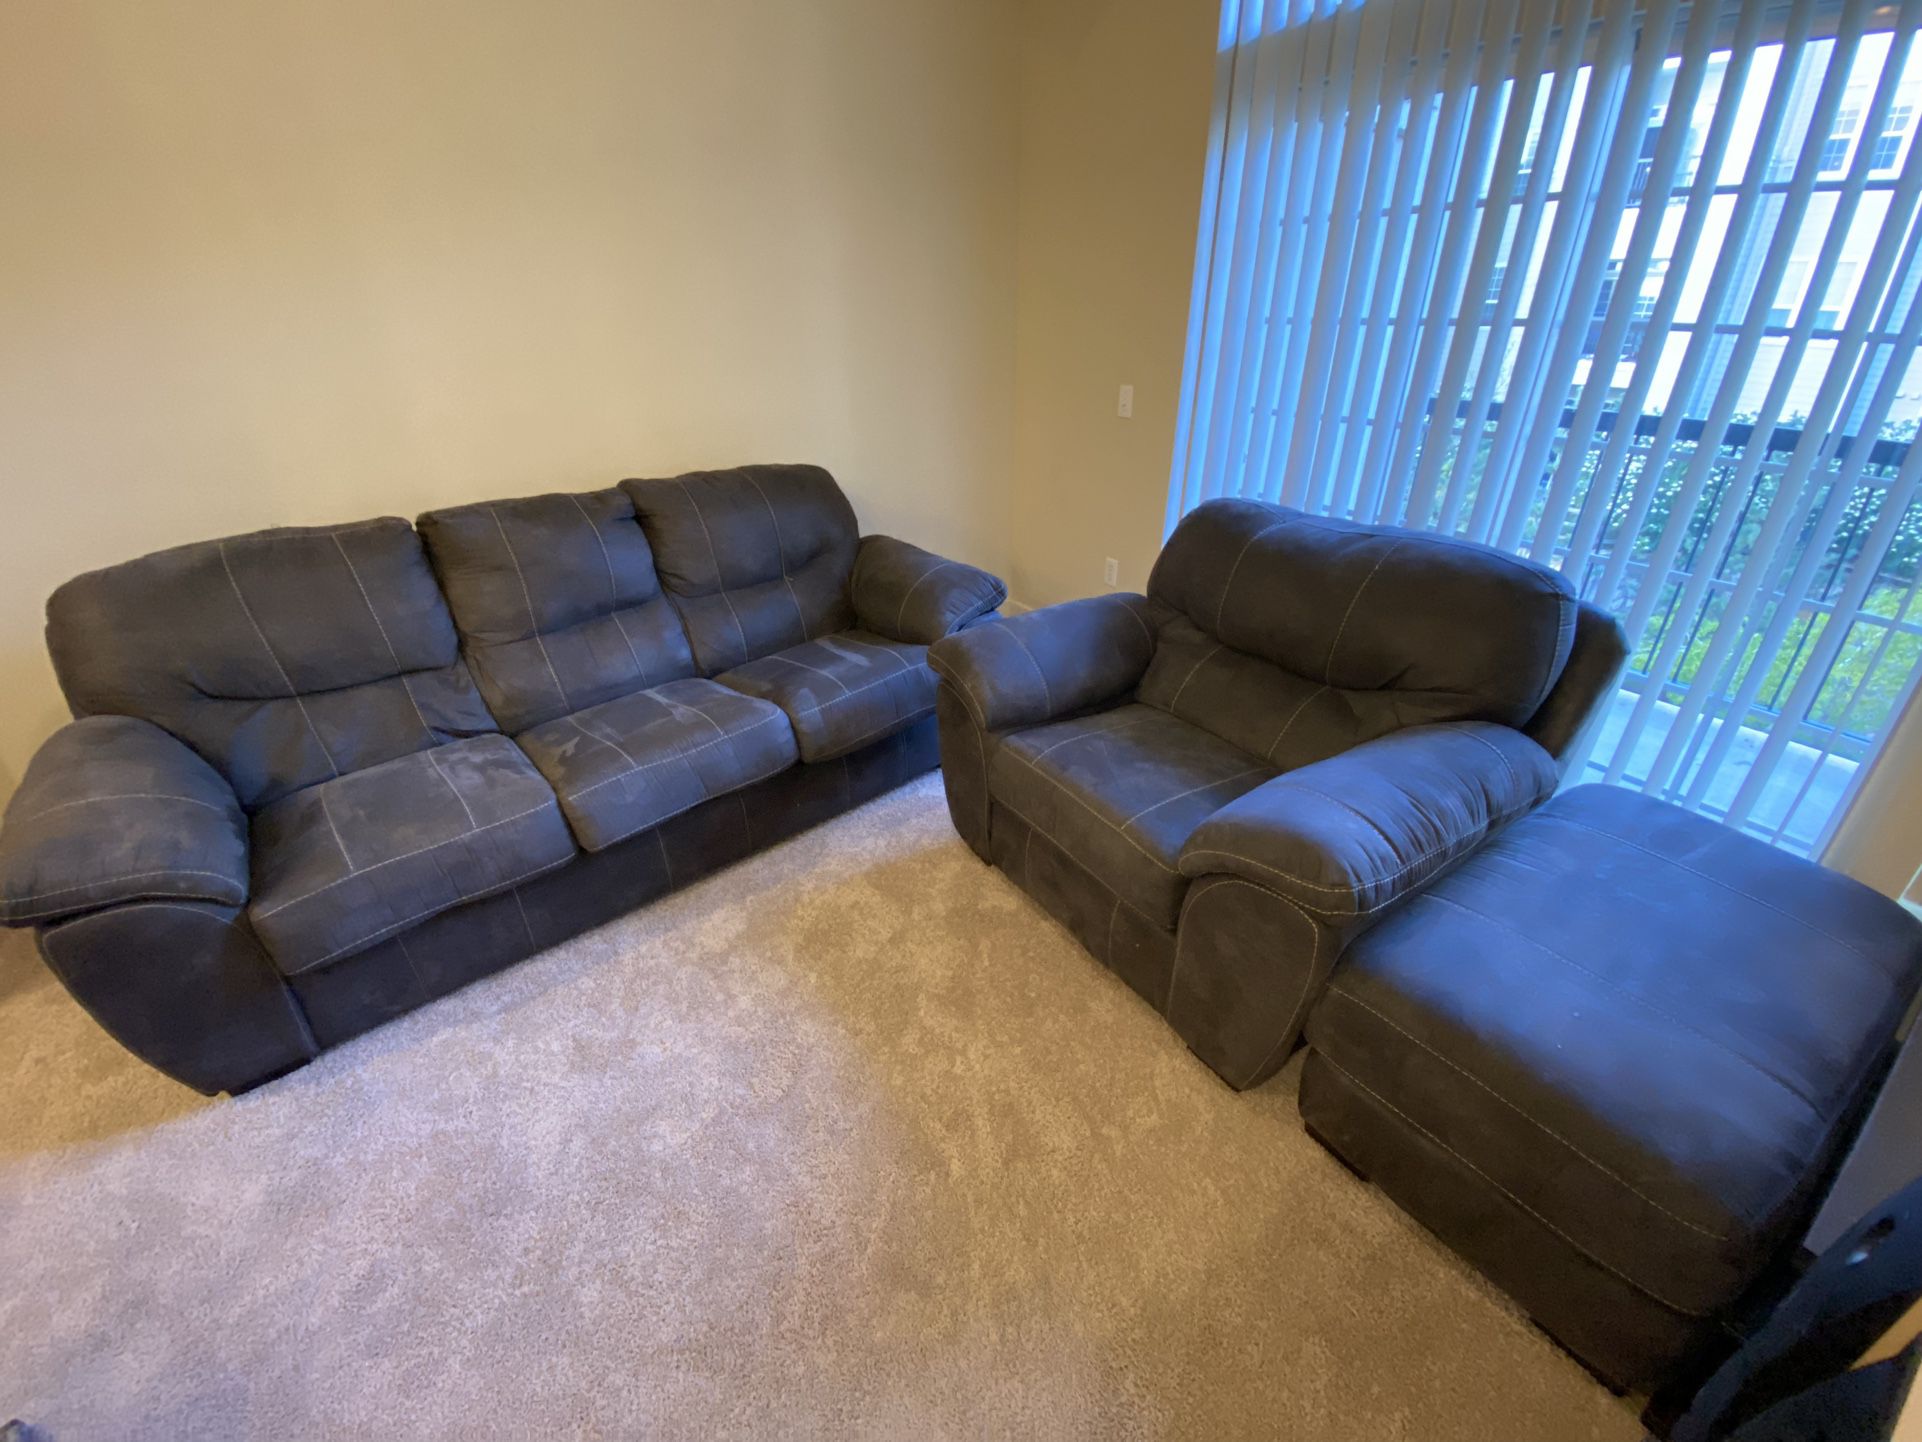 FREE! Couch, Chair, And Ottoman Set